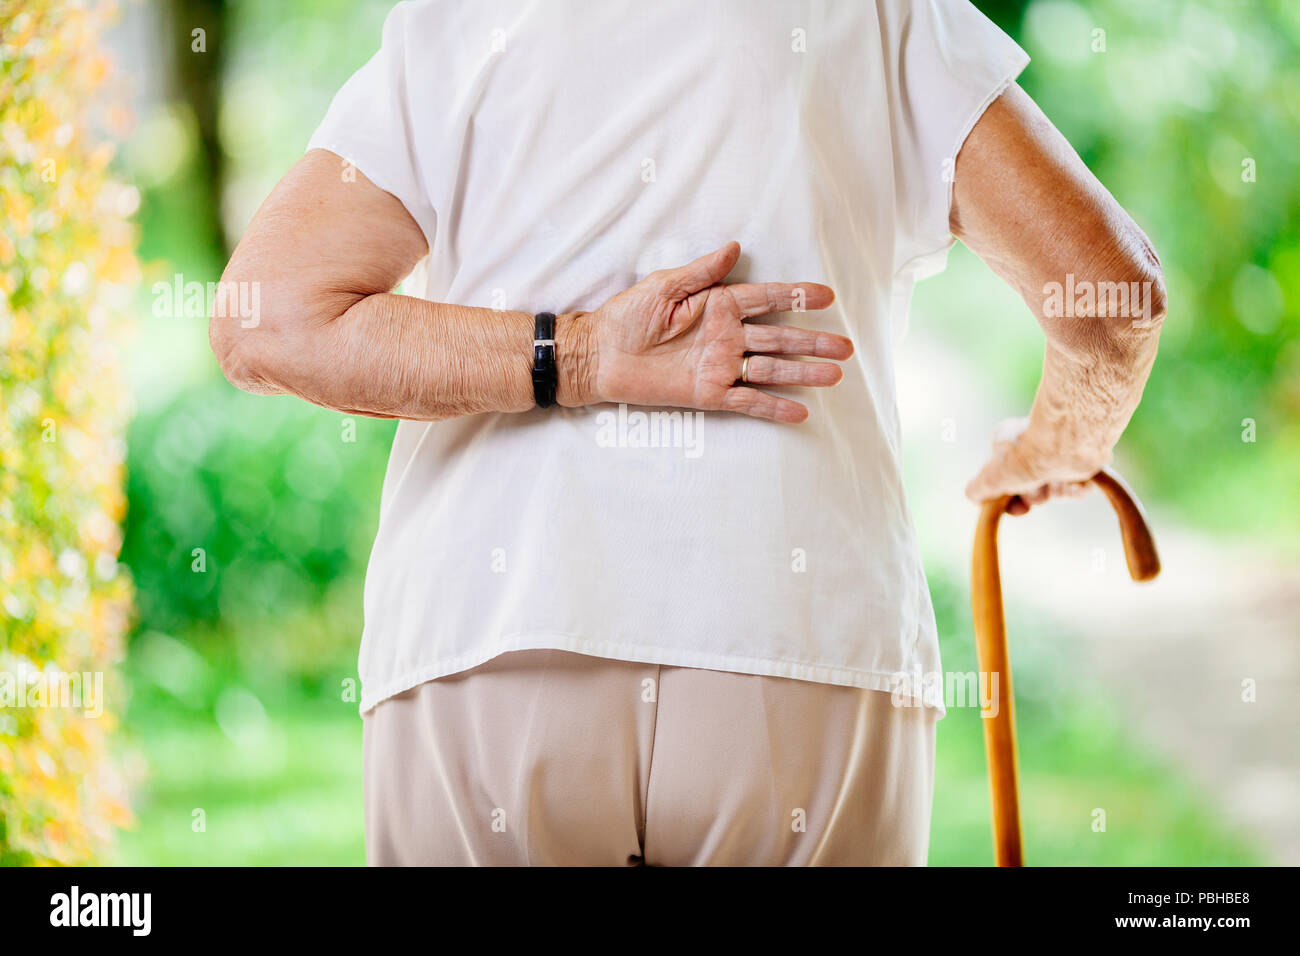 Elderly woman outdoors with lower back pain Stock Photo